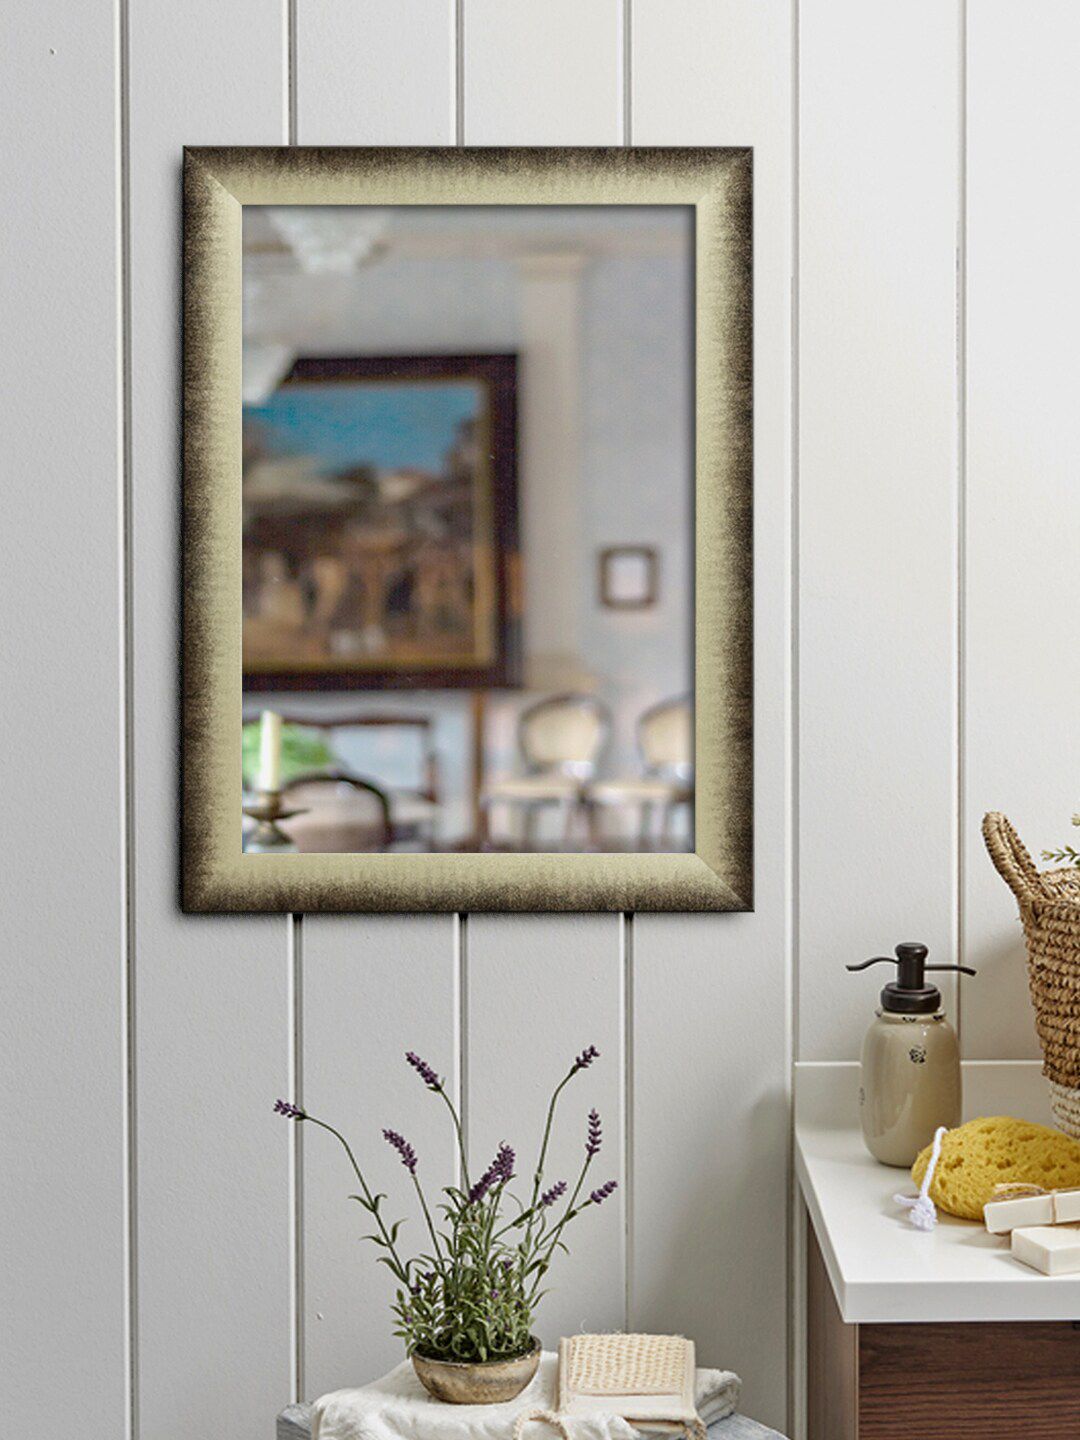 999Store Grey Solid Framed Wall Mirror Price in India